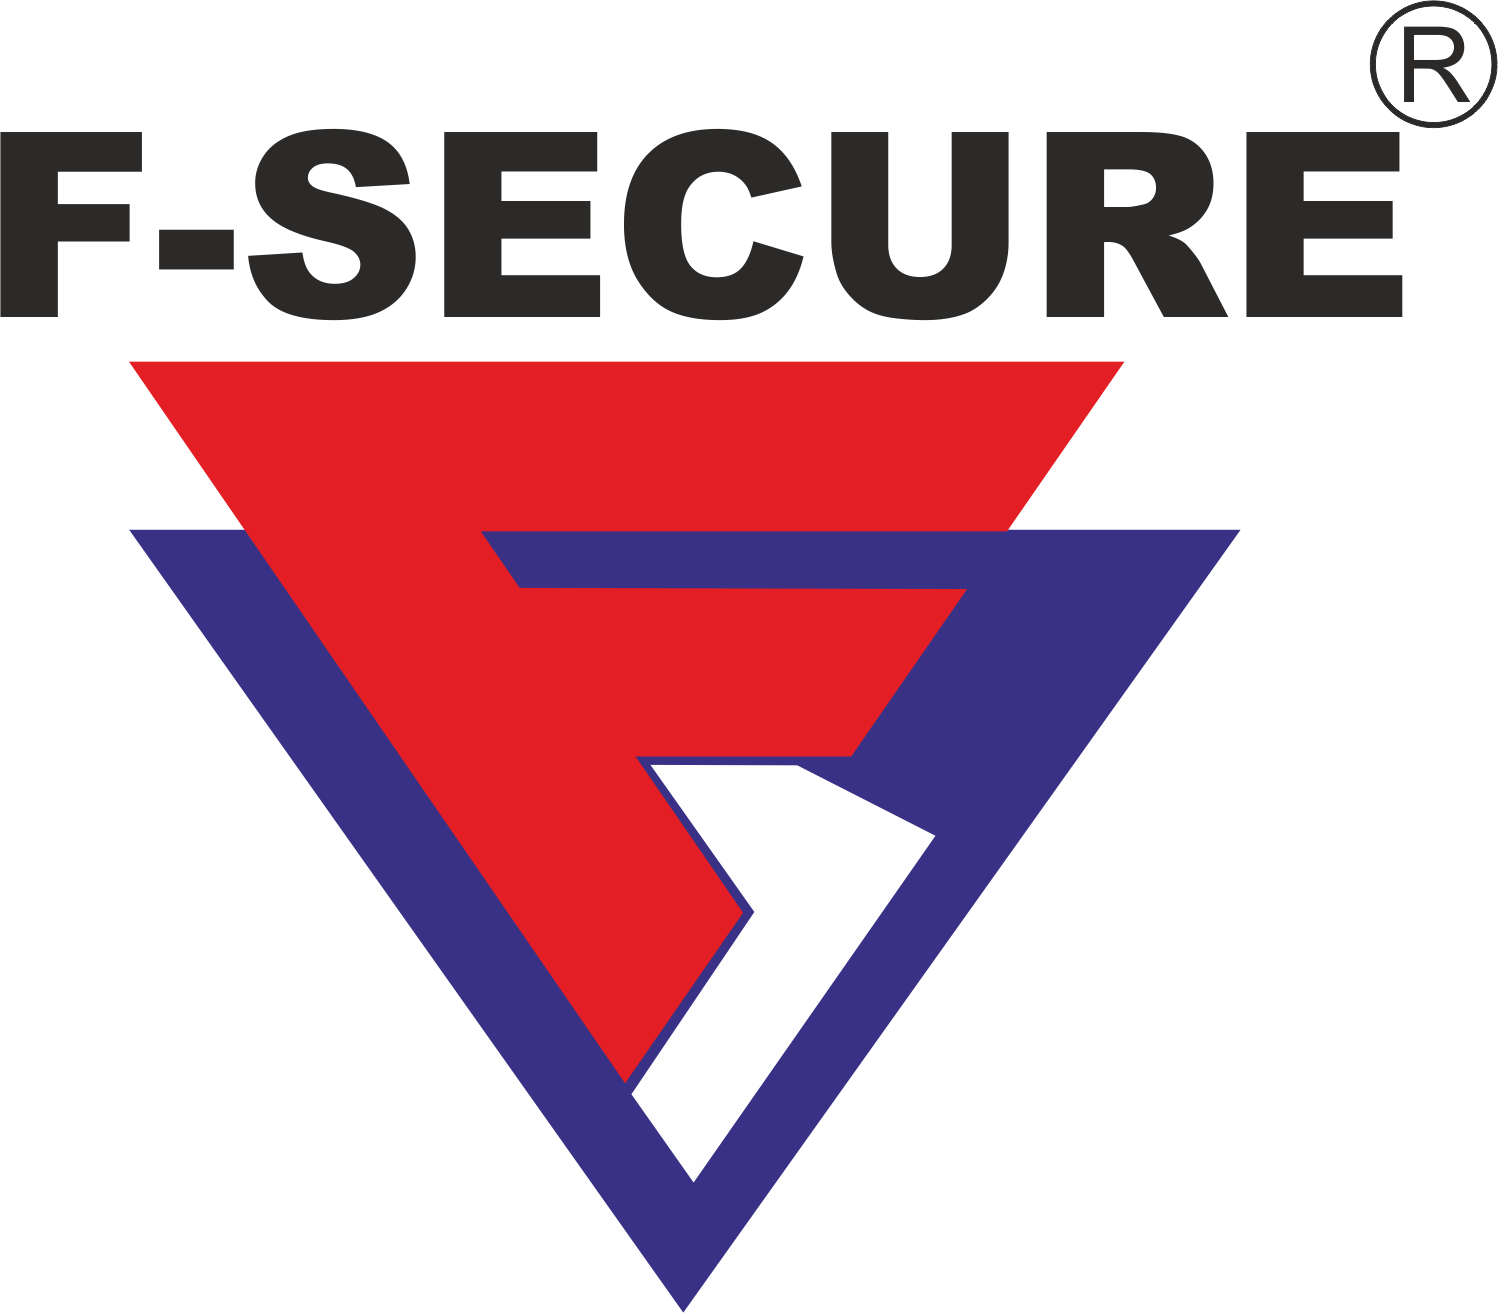 best security services in bangalore